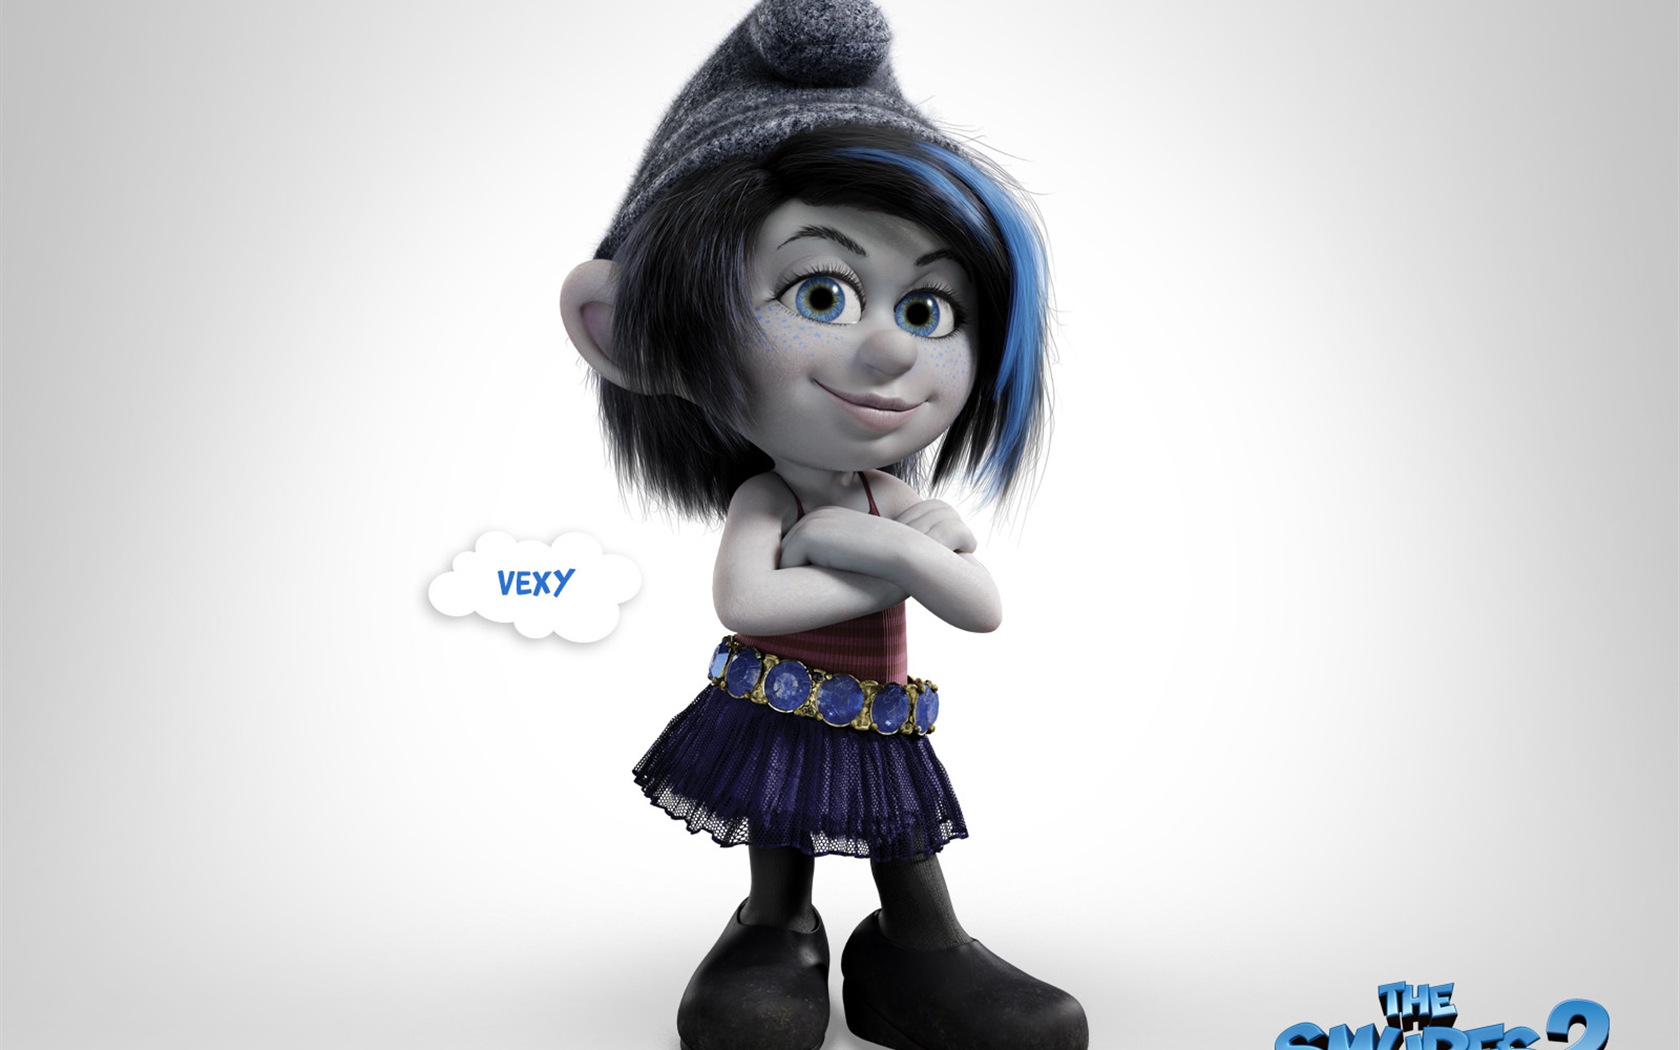 The Smurfs 2 HD movie wallpapers #11 - 1680x1050